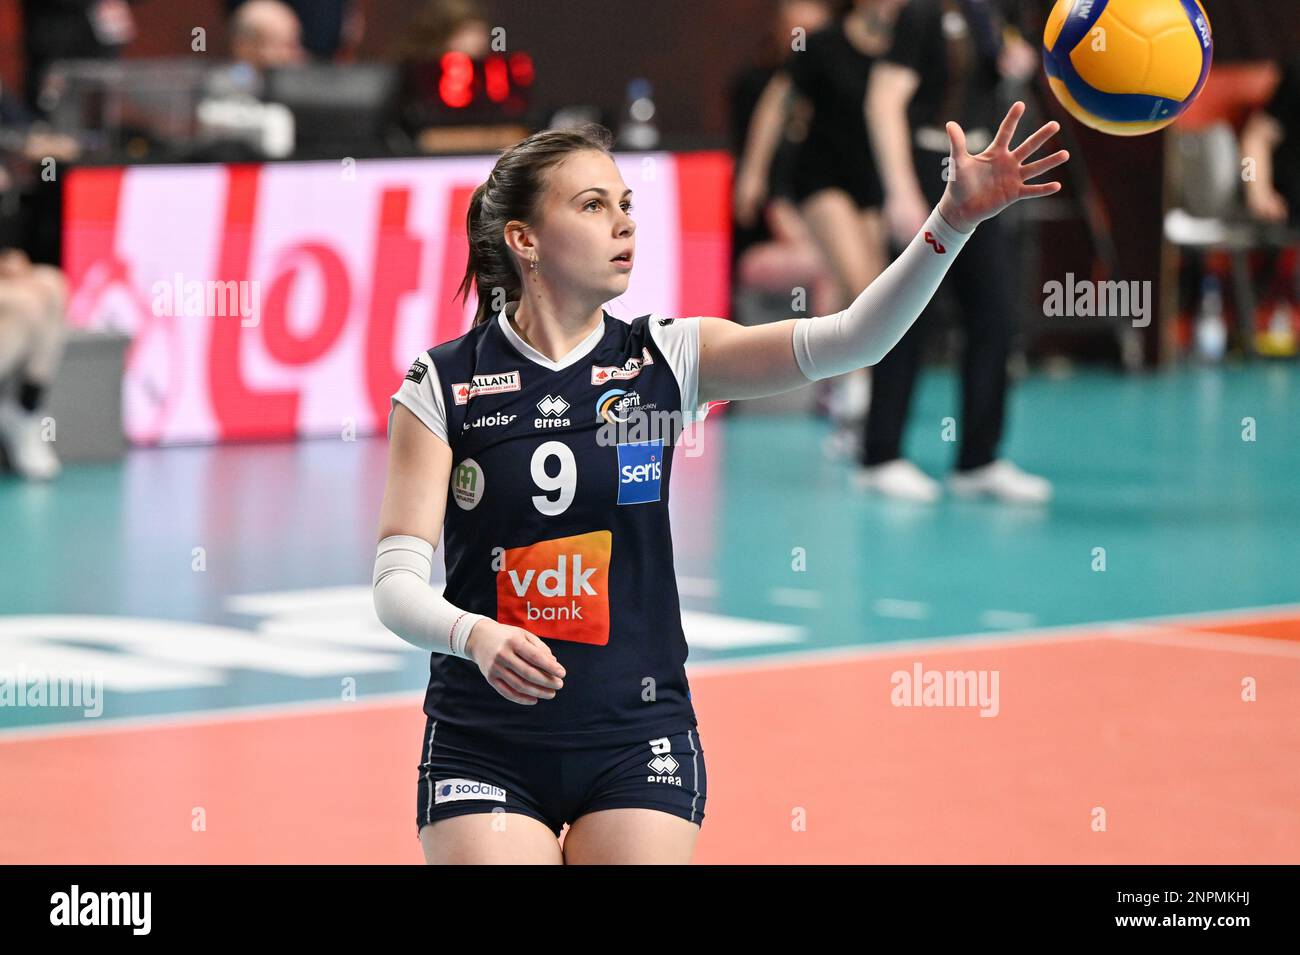 Gent's Lotte De Quick pictured during the match between Asterix Avo Volley Beveren and VDK Bank Gent damesvolley, the final match in the men Belgian volleyball cup competition, Sunday 26 February 2023 in Merksem, Antwerp. BELGA PHOTO DAVID CATRY Stock Photo